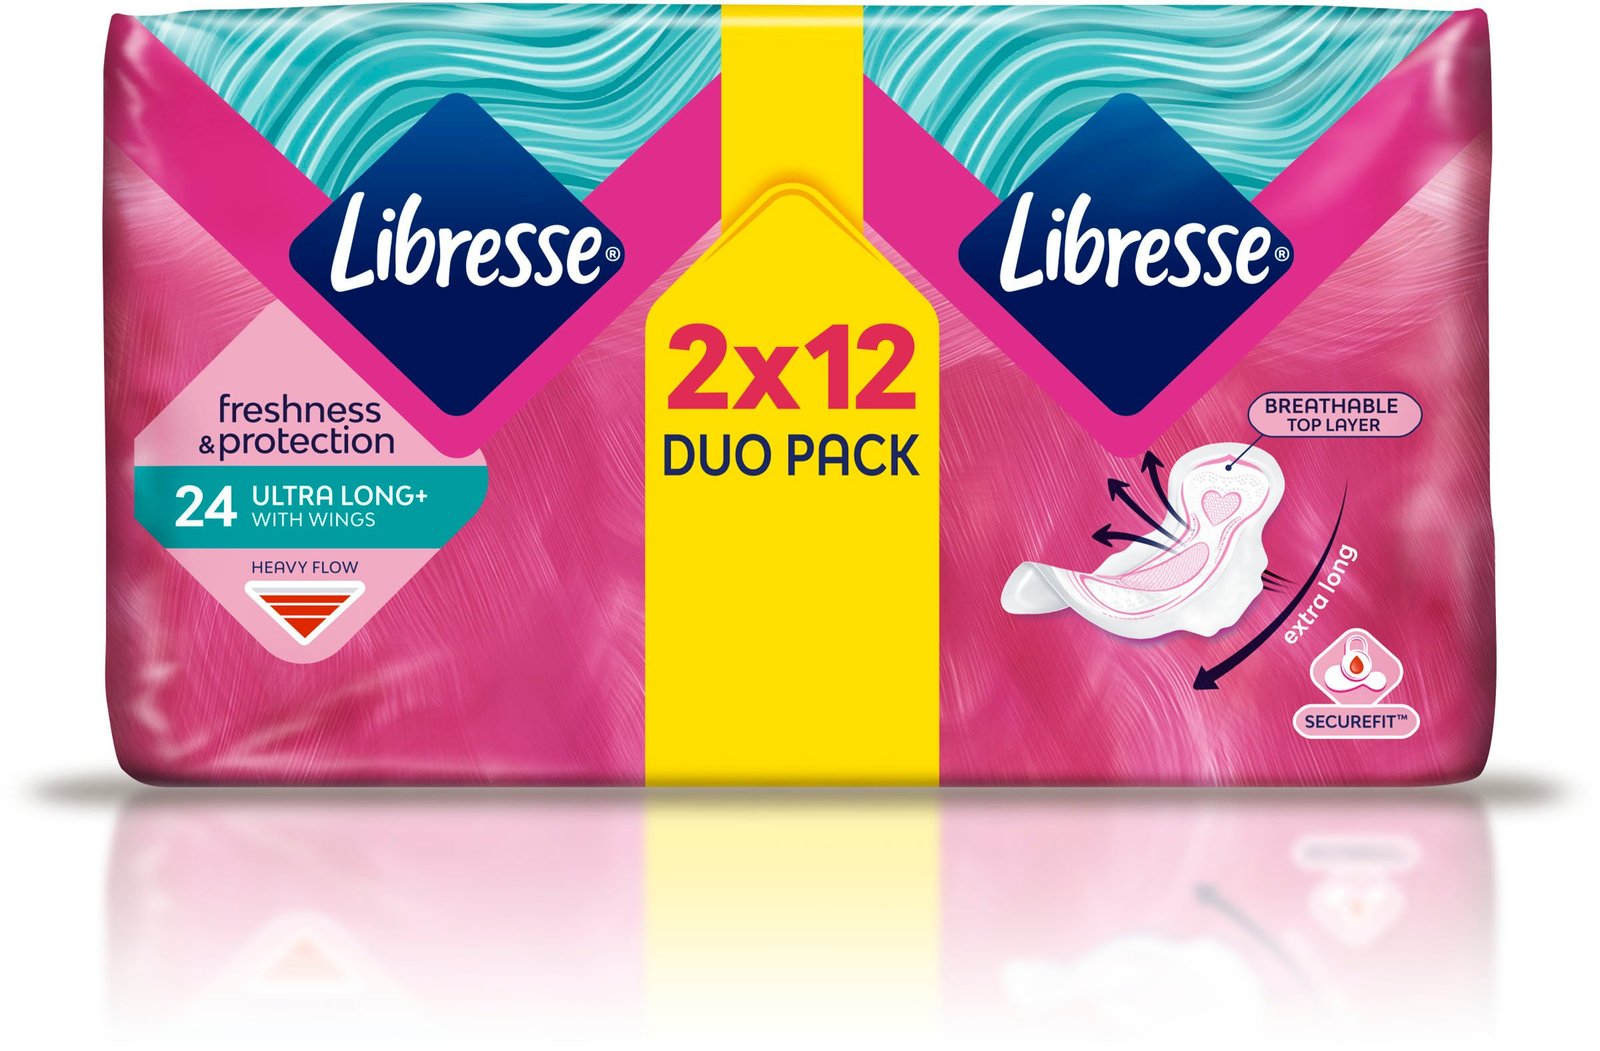 Libresse Freshness & Protection Ultra Long Wing Duopack 24 st